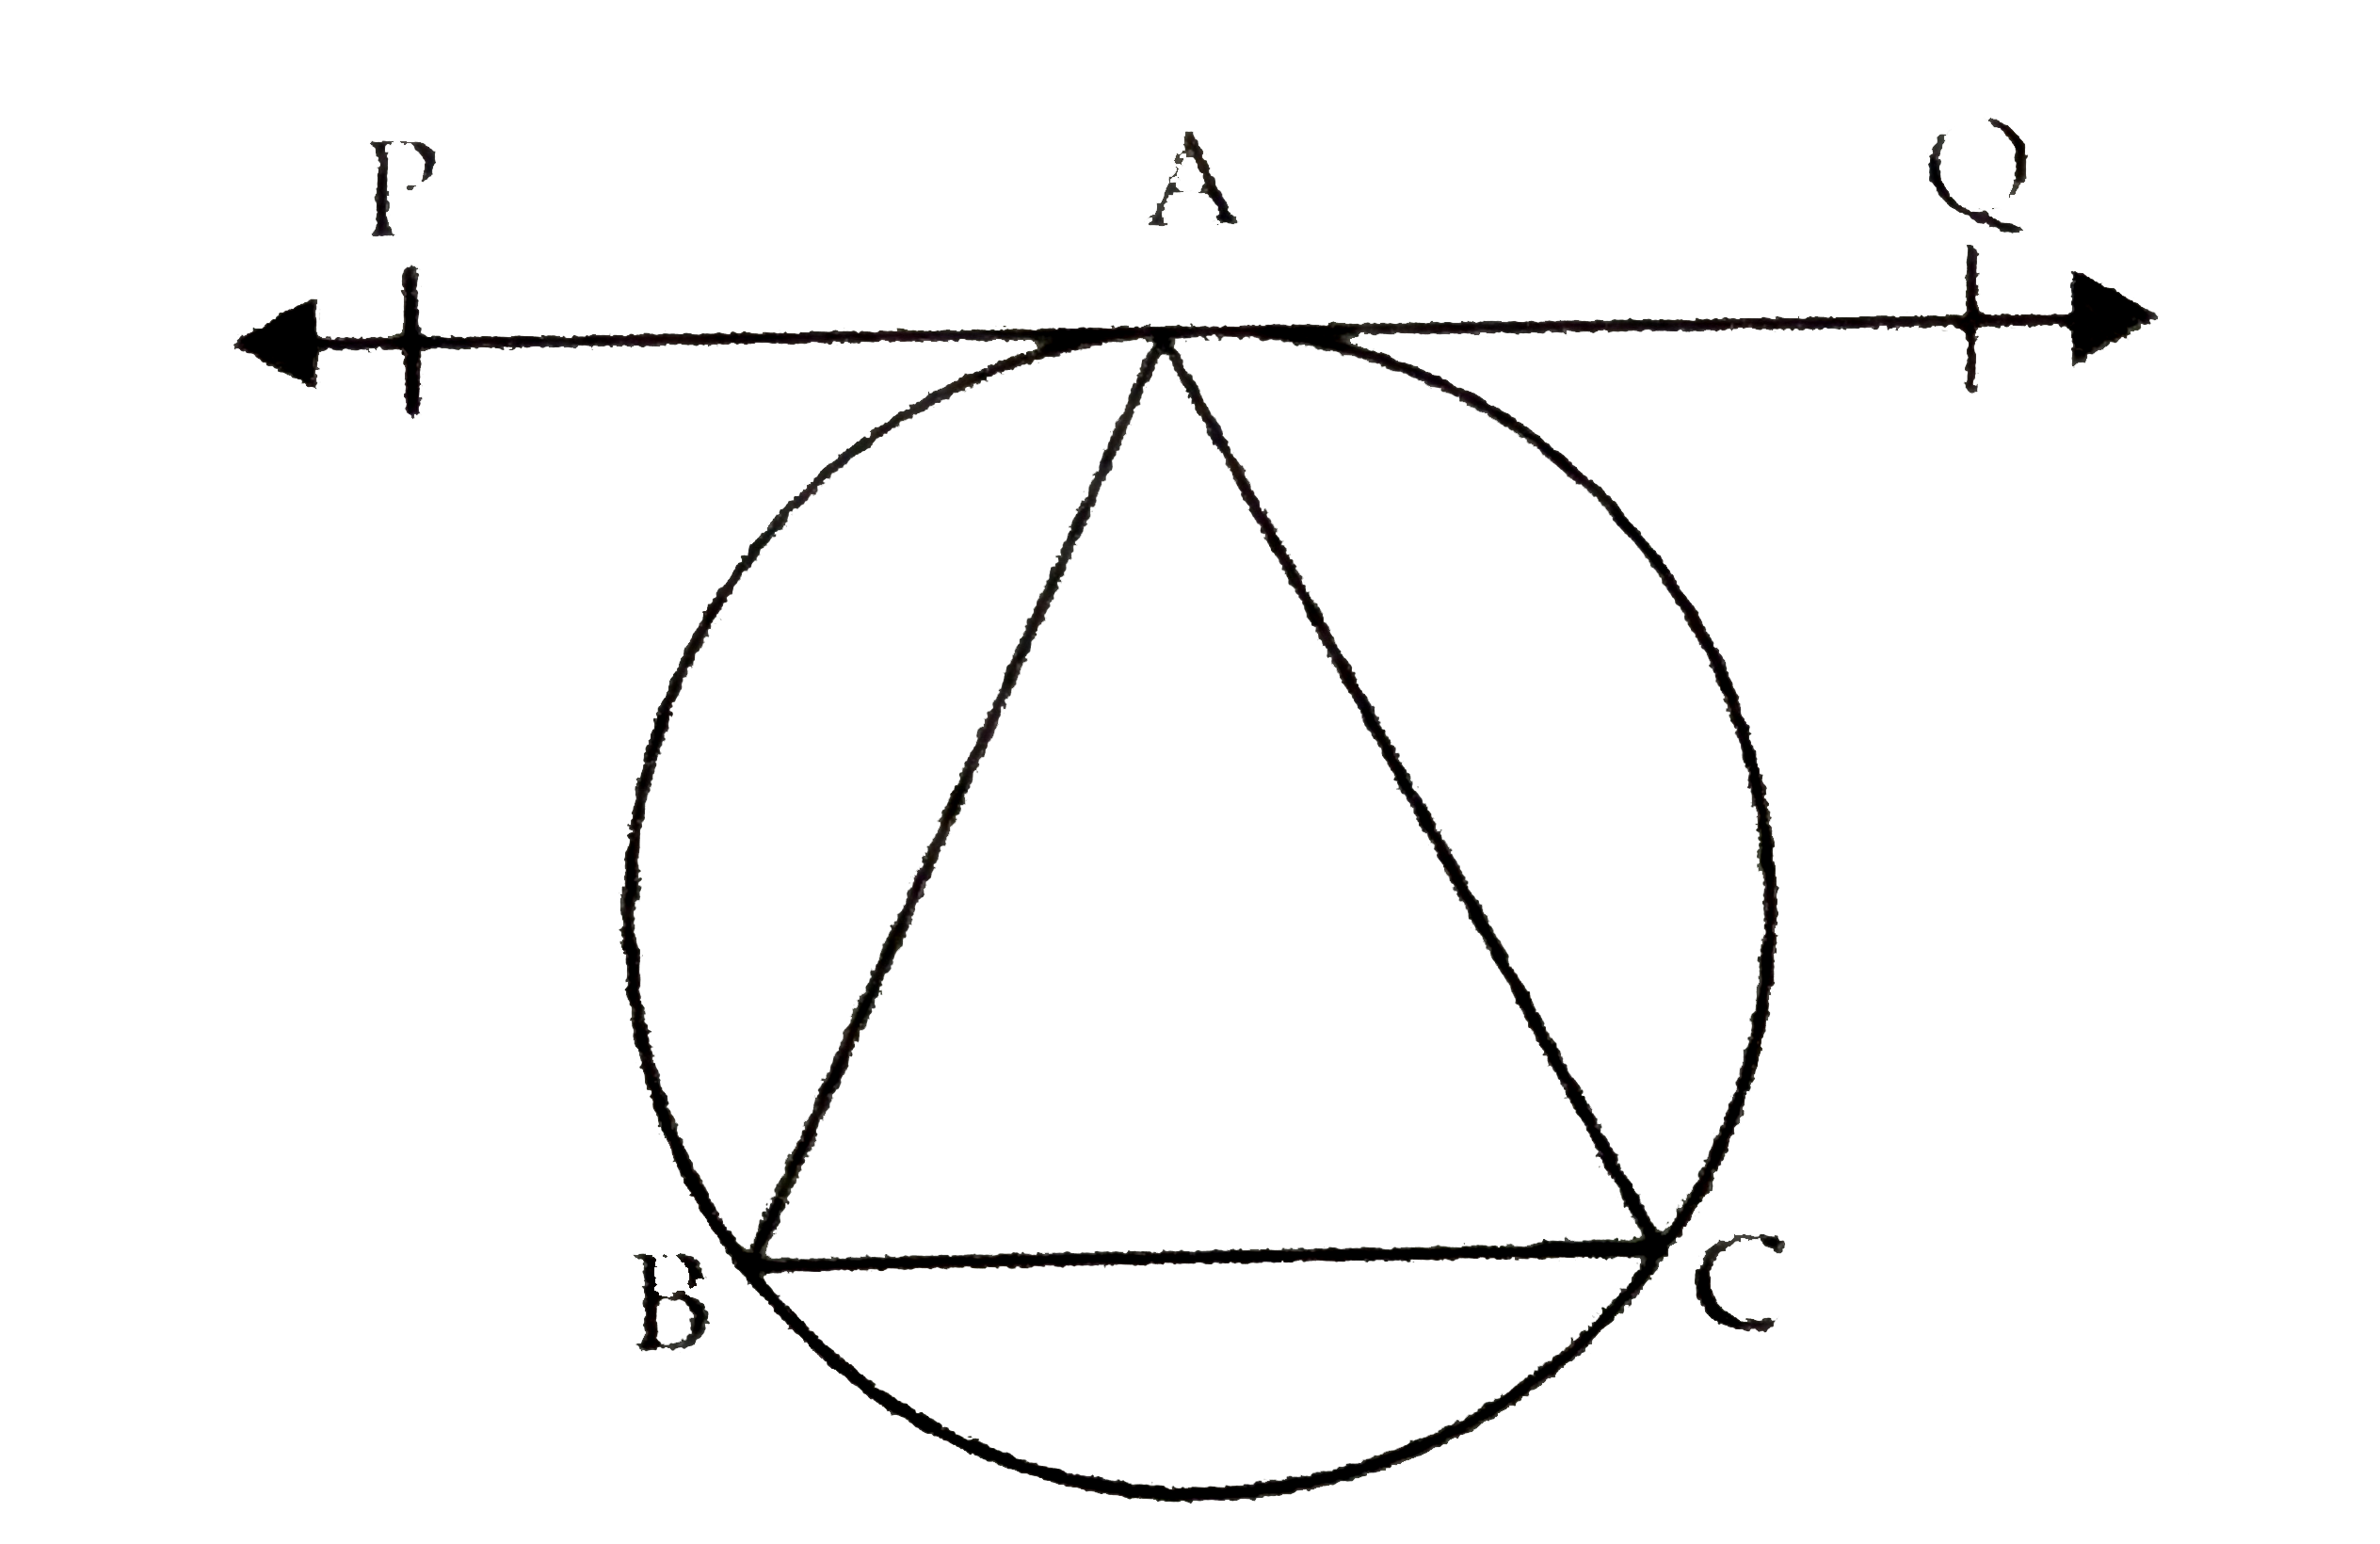 Line PQ is a tangent to the circle at point AB ~= arc AC. Complete the following  activity to prove  DeltaABC as isosceles triangle.